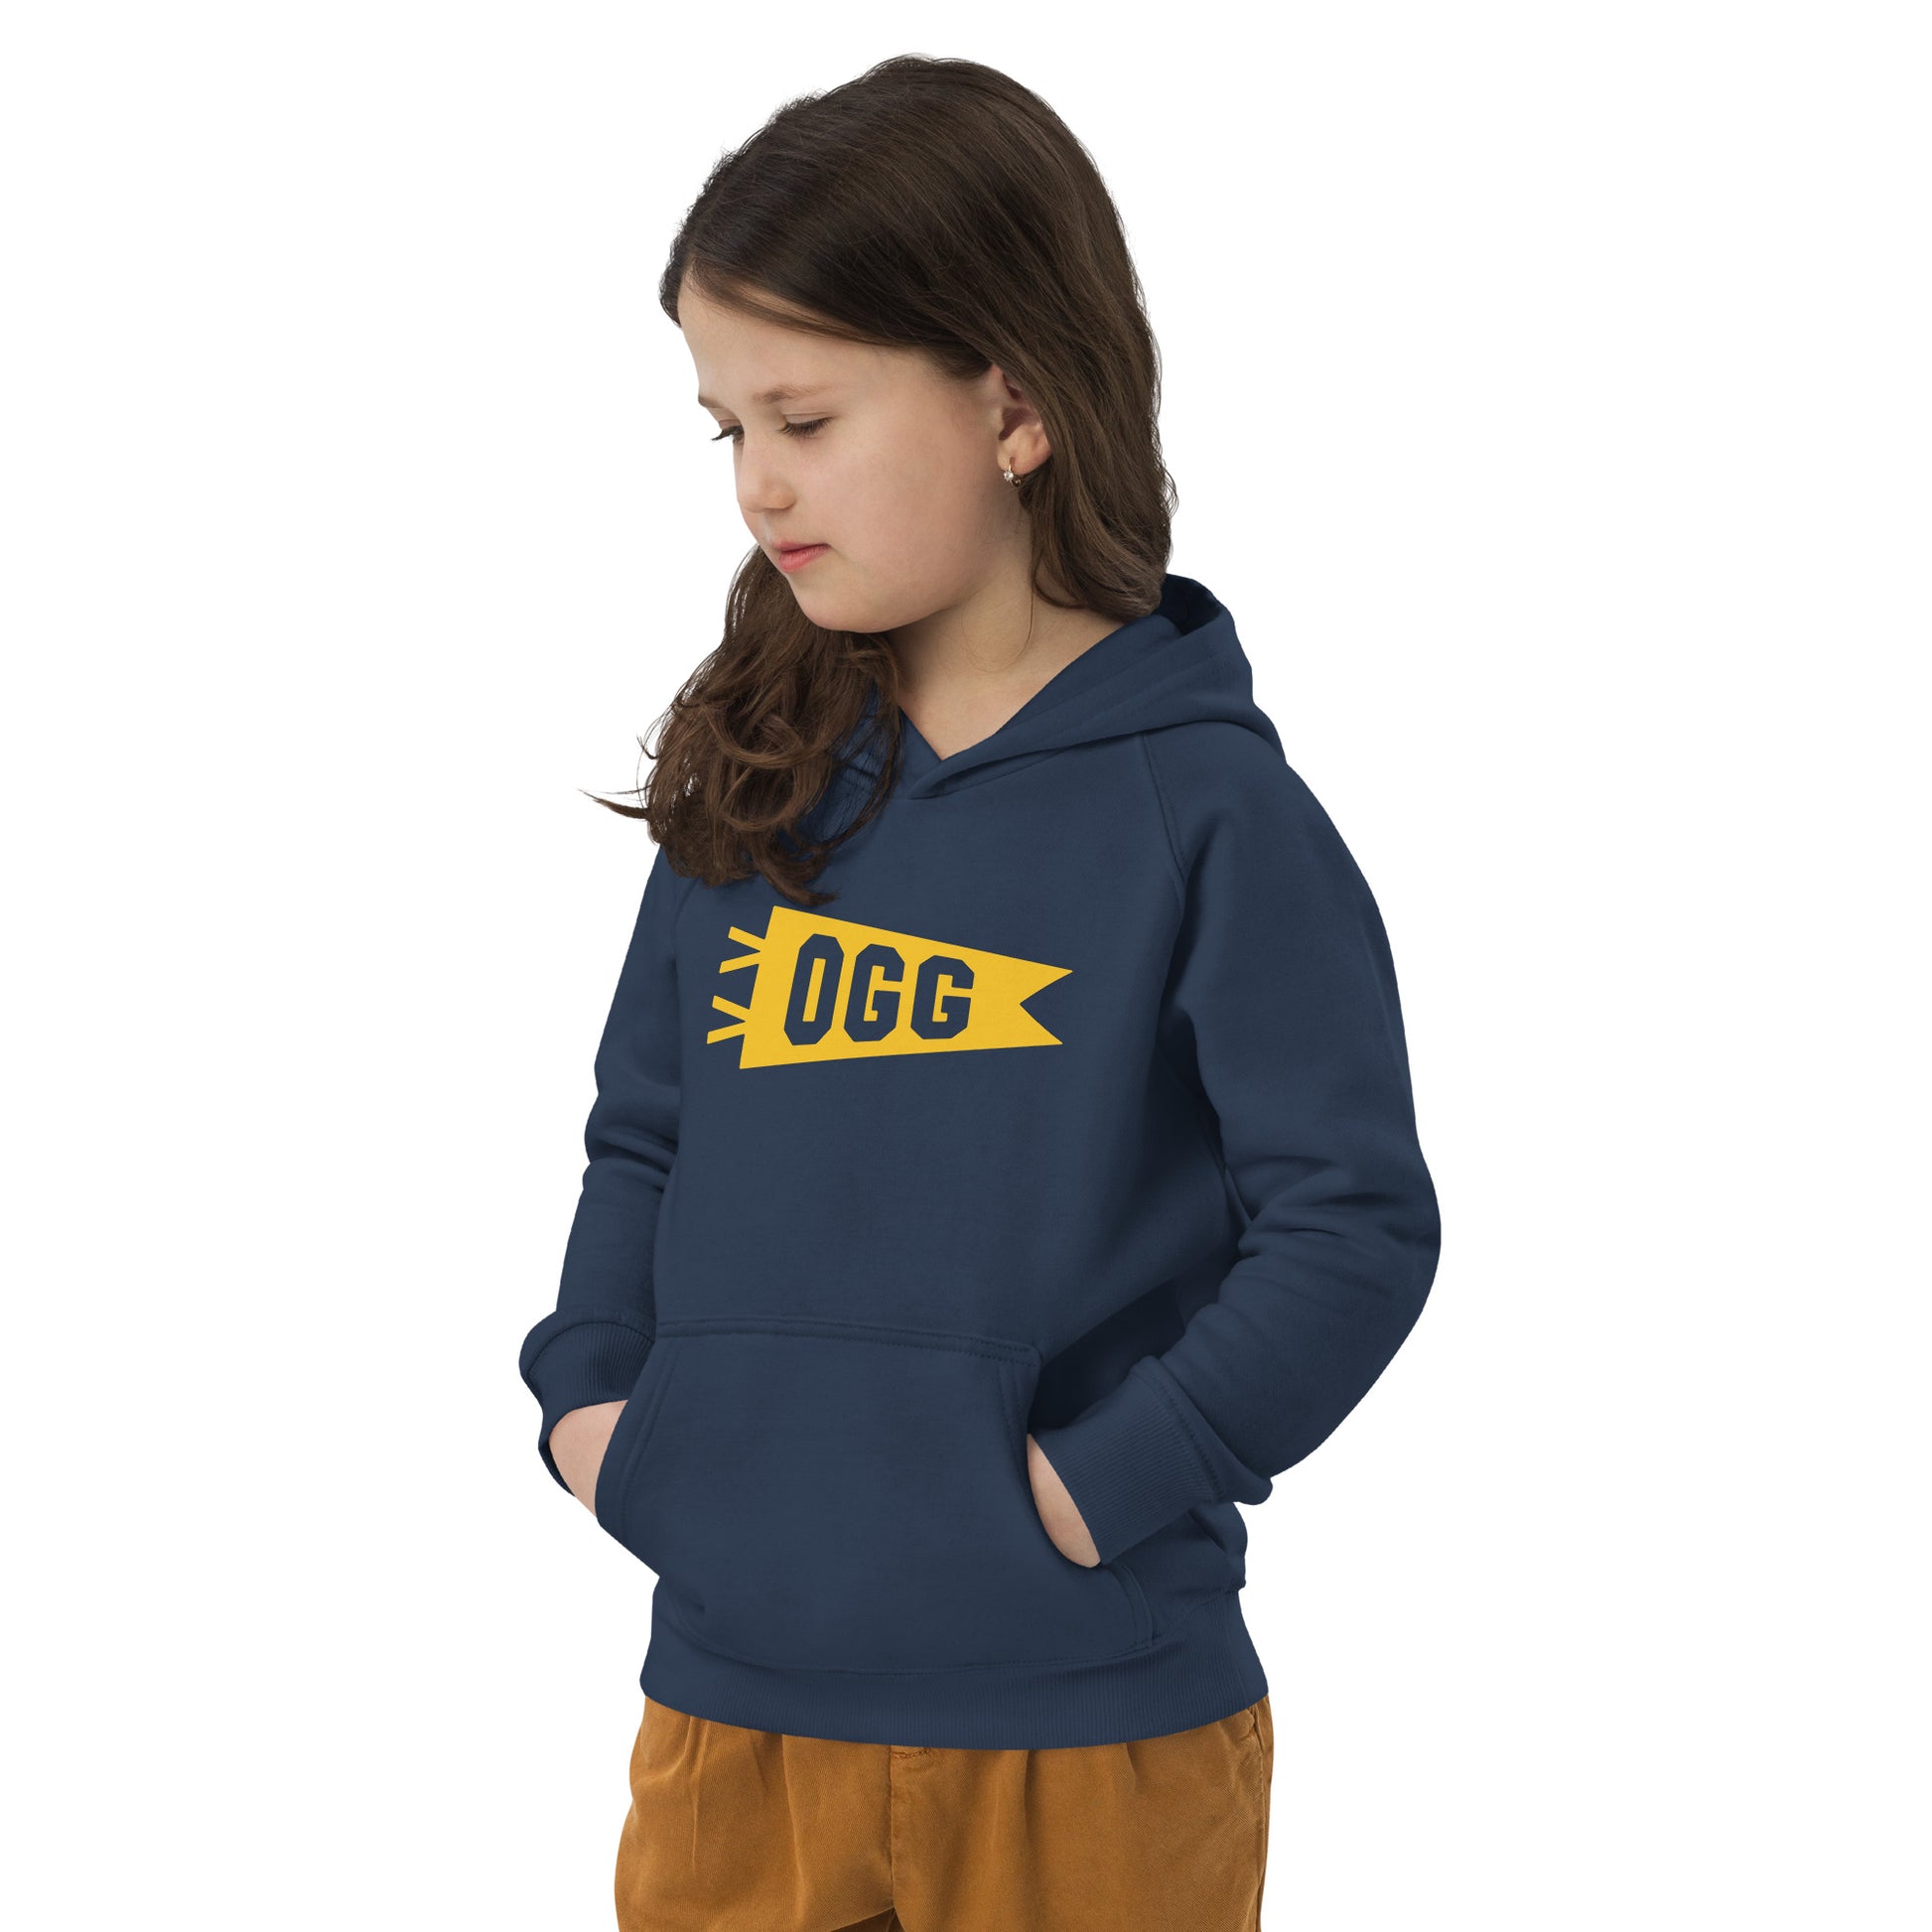 Kid's Sustainable Hoodie - Yellow Graphic • OGG Maui • YHM Designs - Image 05